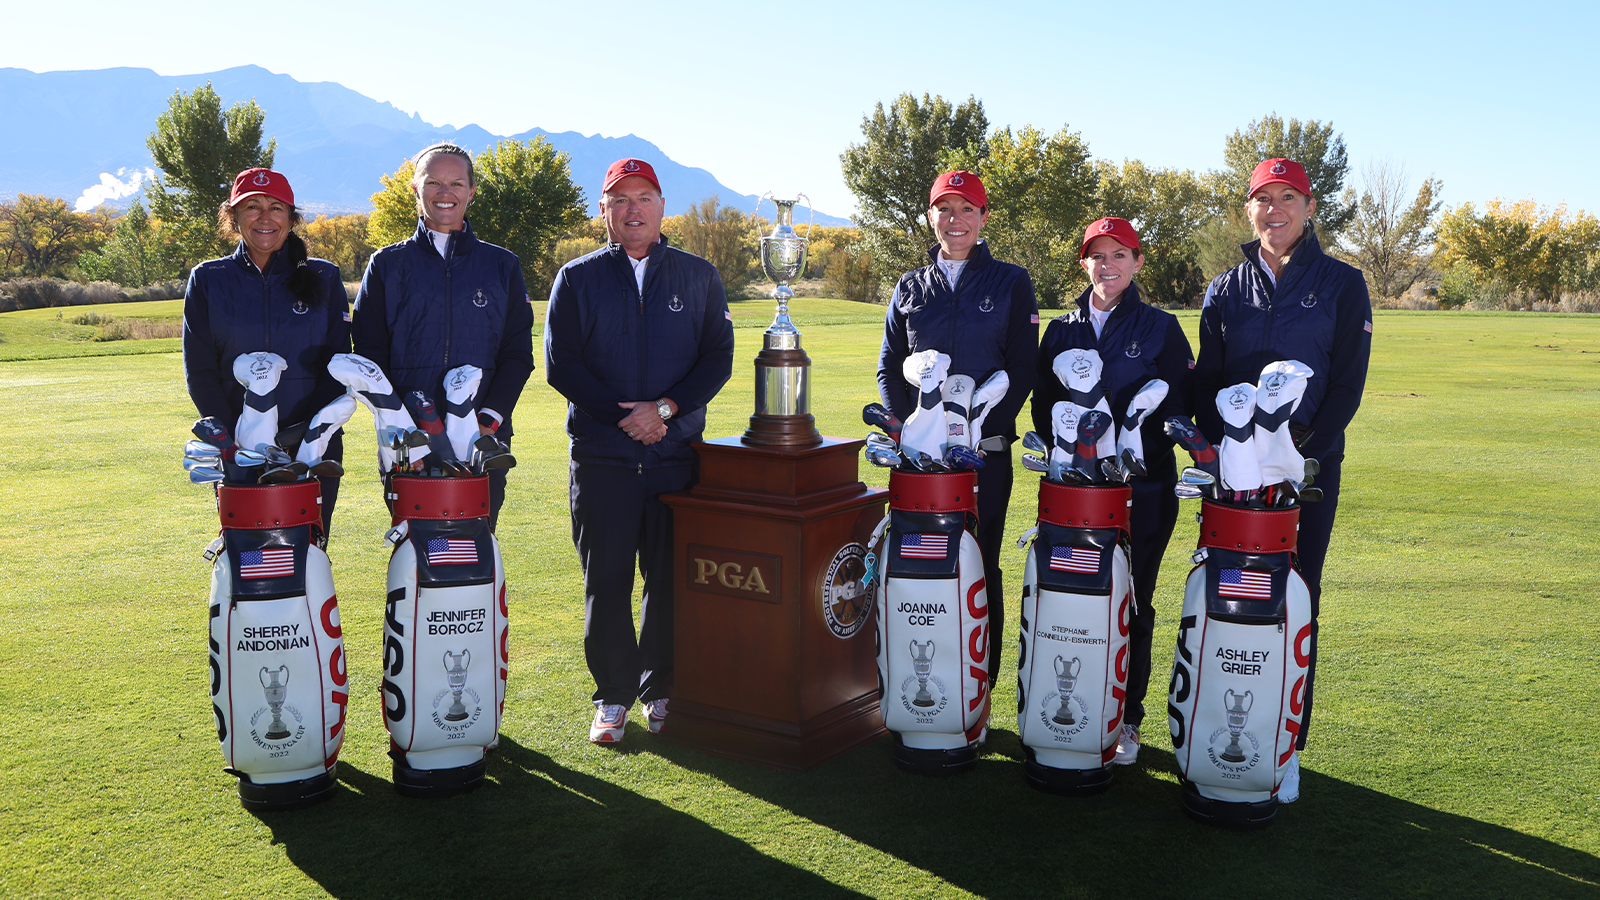 Sherry Andonian, Jennifer Borocz, PGA of America President and Team Captain, Jim Richerson, Joanna Coe, Stephanie Connelly-Eiswerth and Ashley Grier of the U.S. Team pose with the tournament cup before the 2nd Women’s PGA Cup at Twin Warriors Golf Club on Wednesday, October 26, 2022 in Santa Ana Pueblo, New Mexico. (Photo by Sam Greenwood/PGA of America)